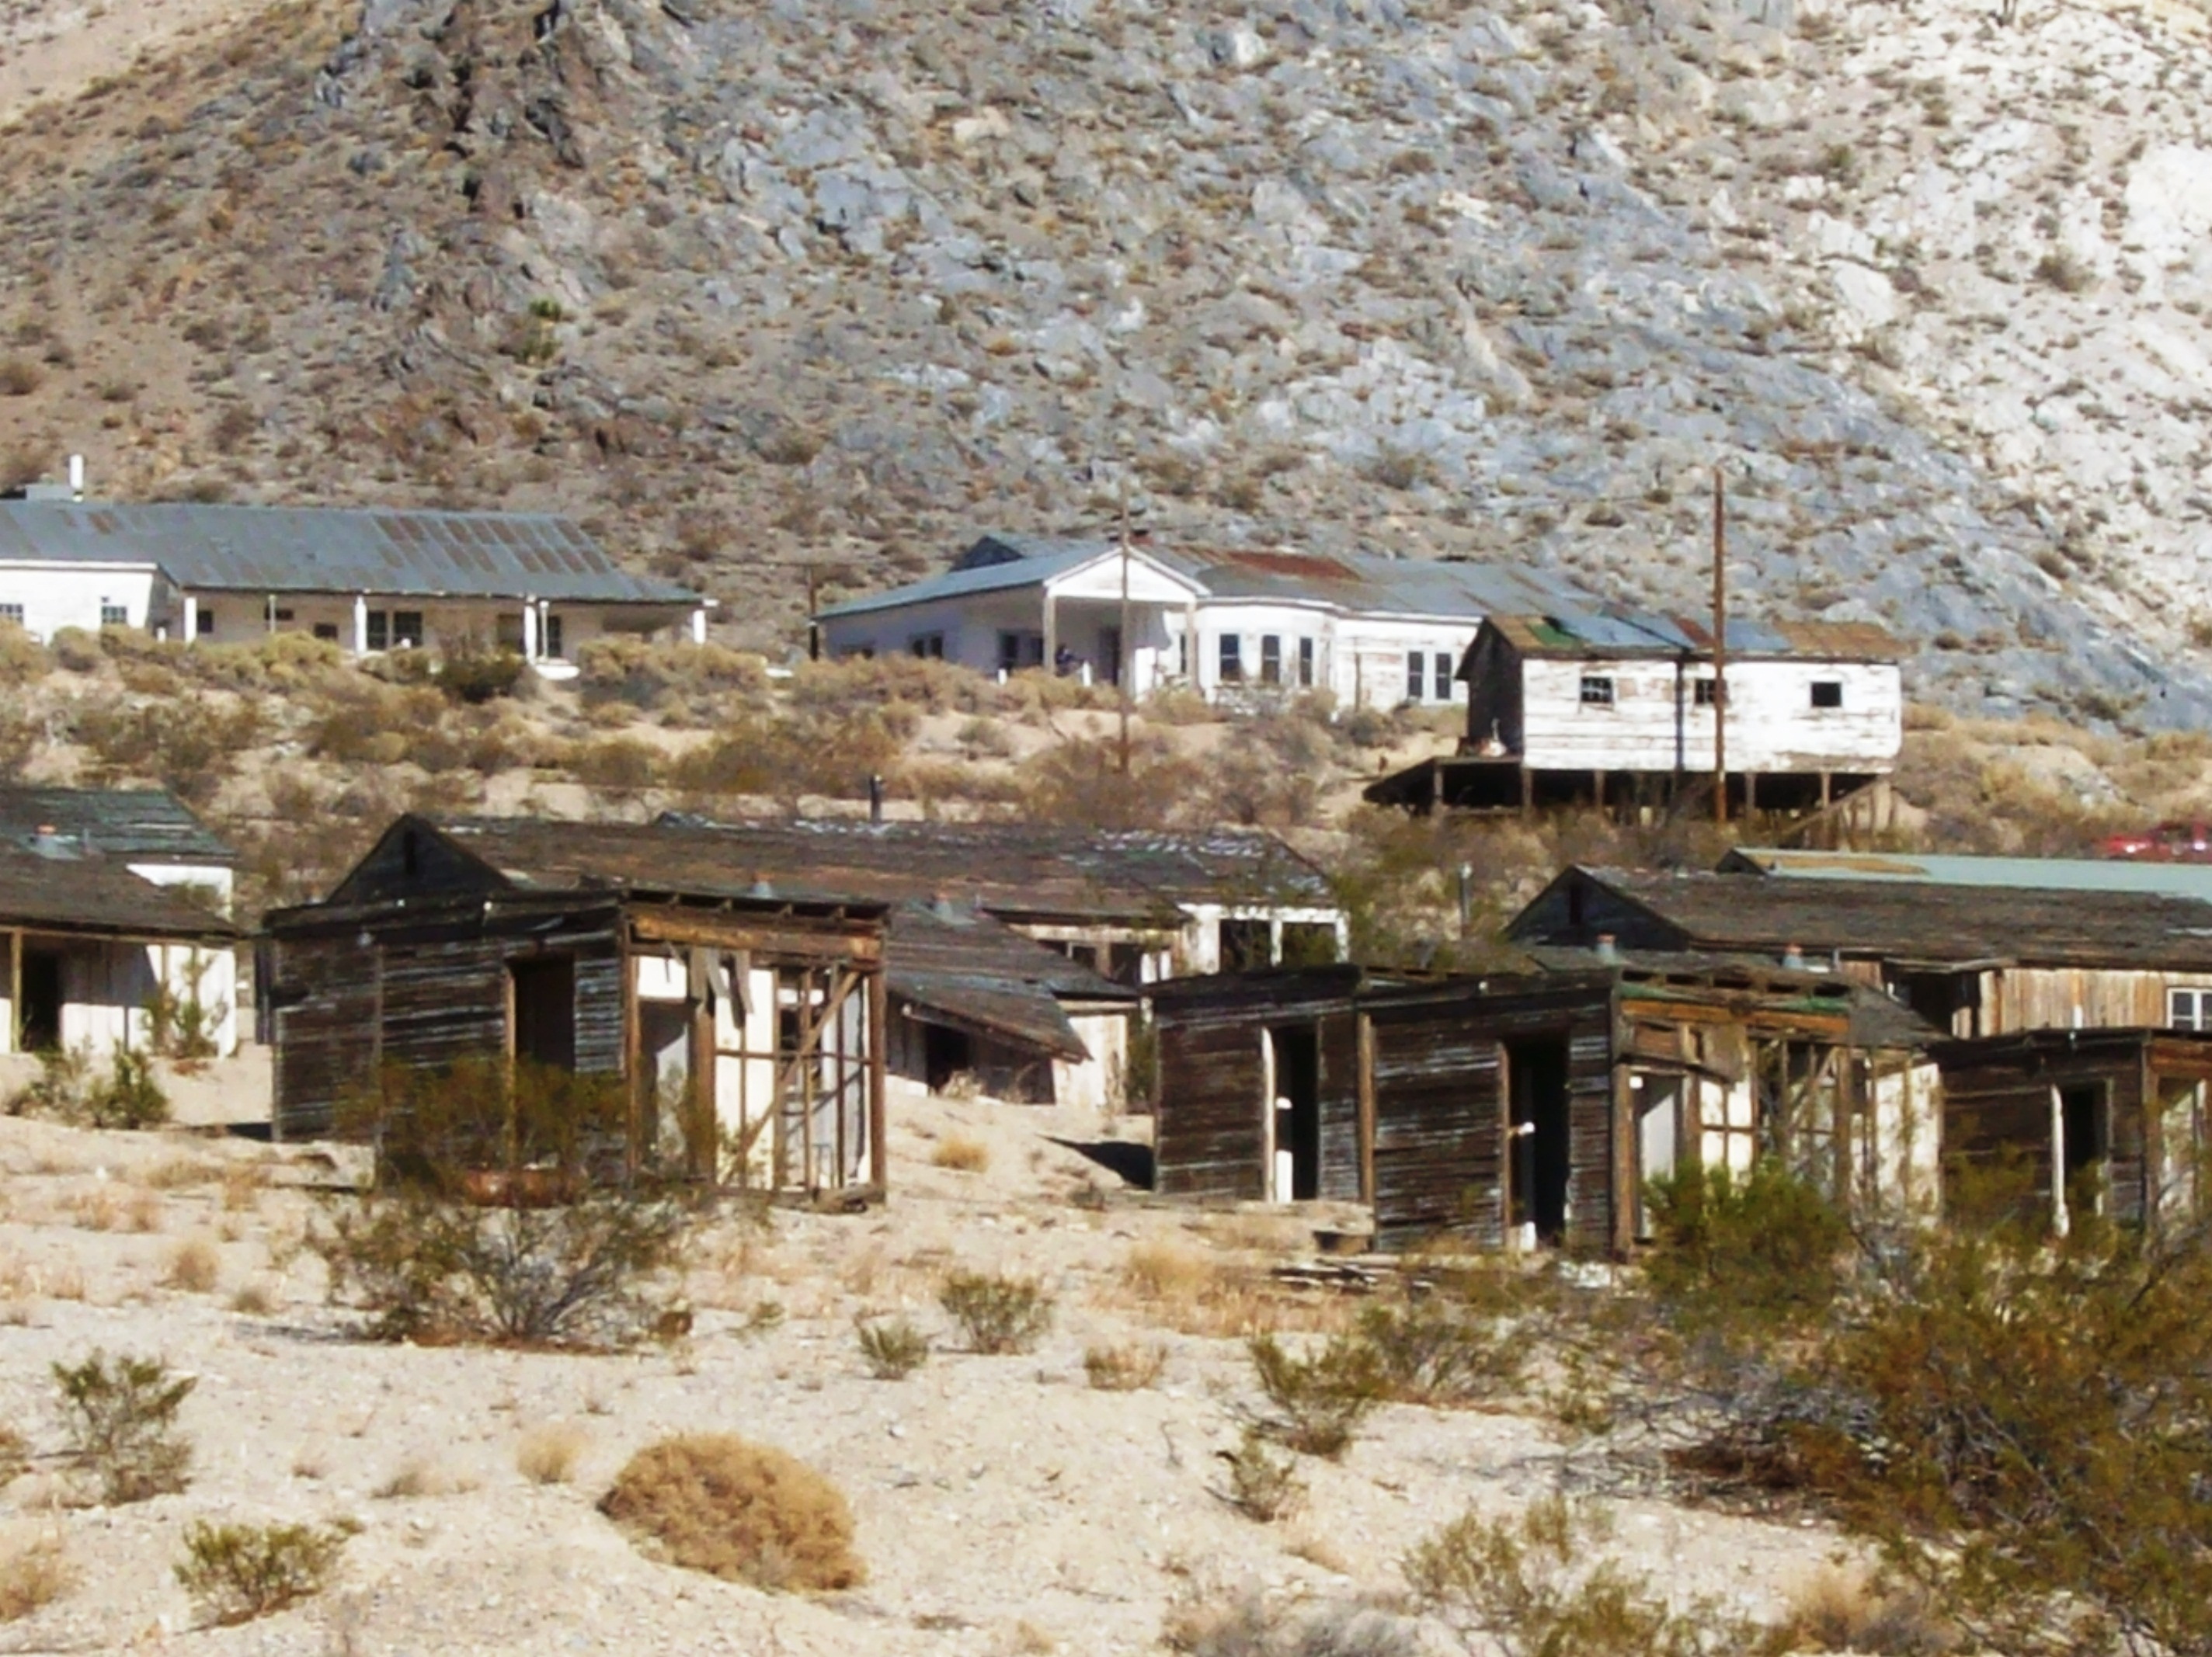 Abandoned mine buildings (Anaconda Copper Mining Company) in the bright sunlight on the outskirts of Darwin, a ghost town outside Death Valley, CA (darwin08xy)